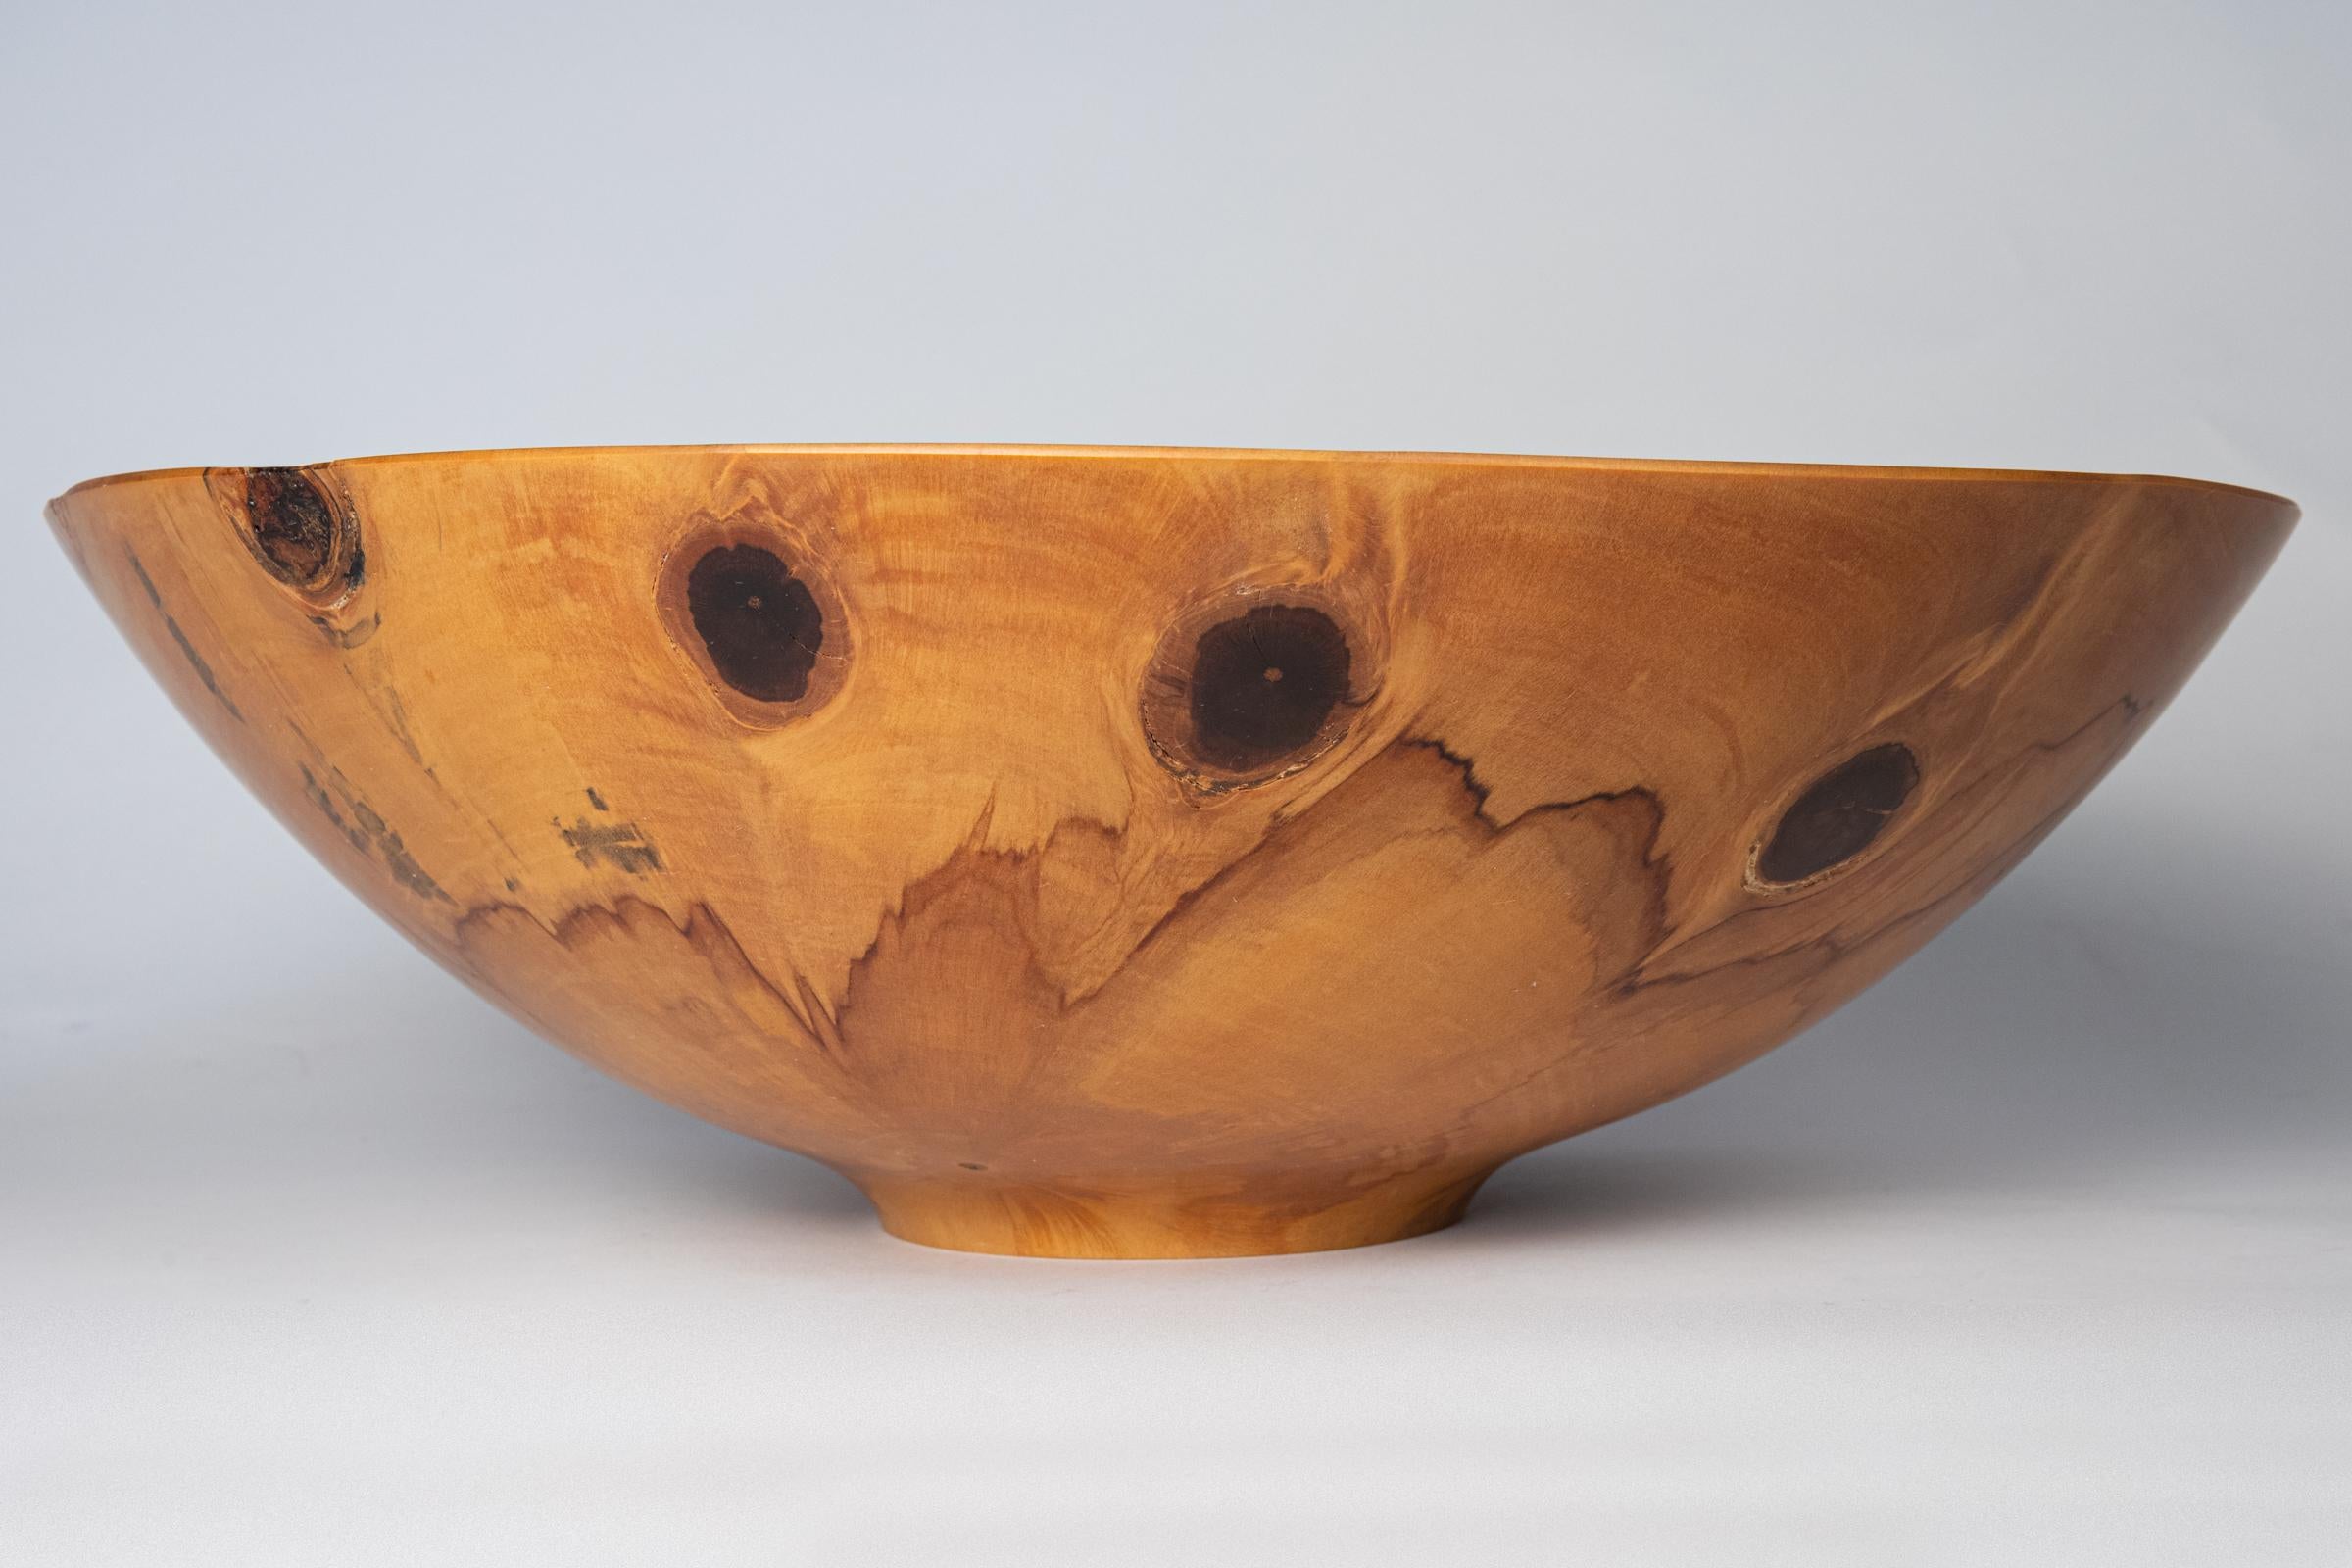 North American Large Hawaiian Turned Wood Art Bowl by Syd Vierra For Sale